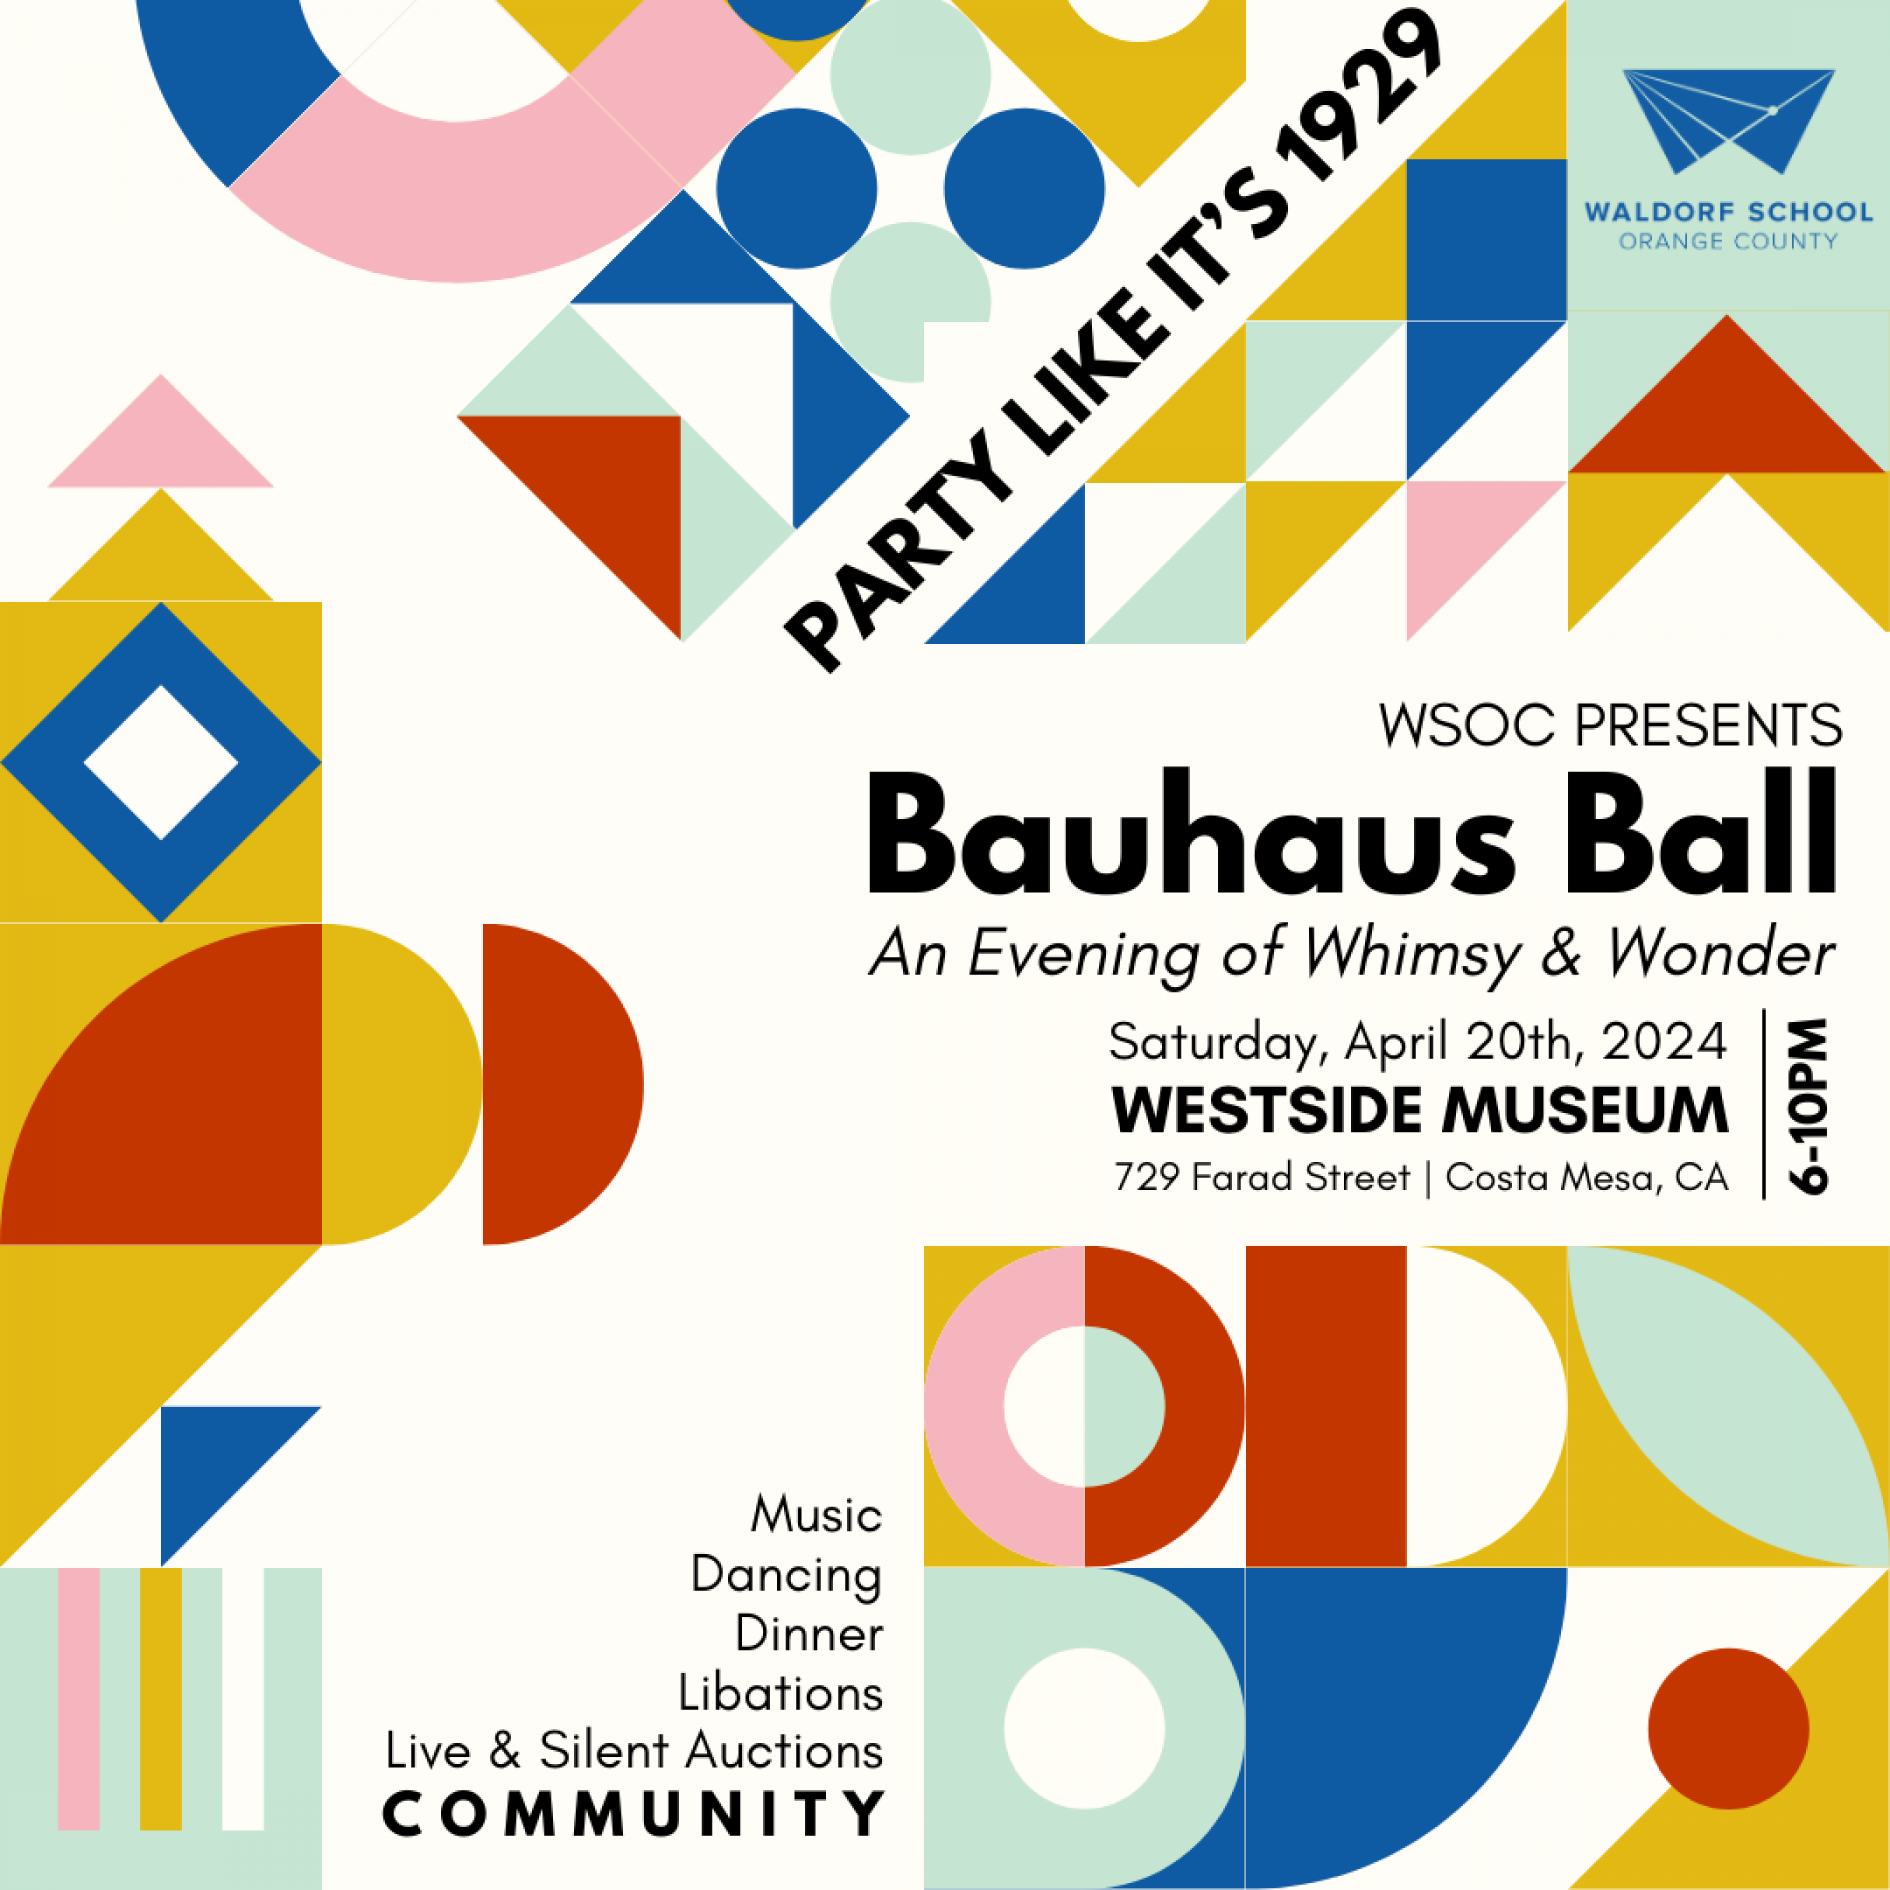 A colorful flyer inviting people to the Bauhaus Ball, a fundraiser for Waldorf School of Orange County, that is taking place at the Westside Museum in Costa Mesa on Saturday, April 20, from 6-10 p.m.